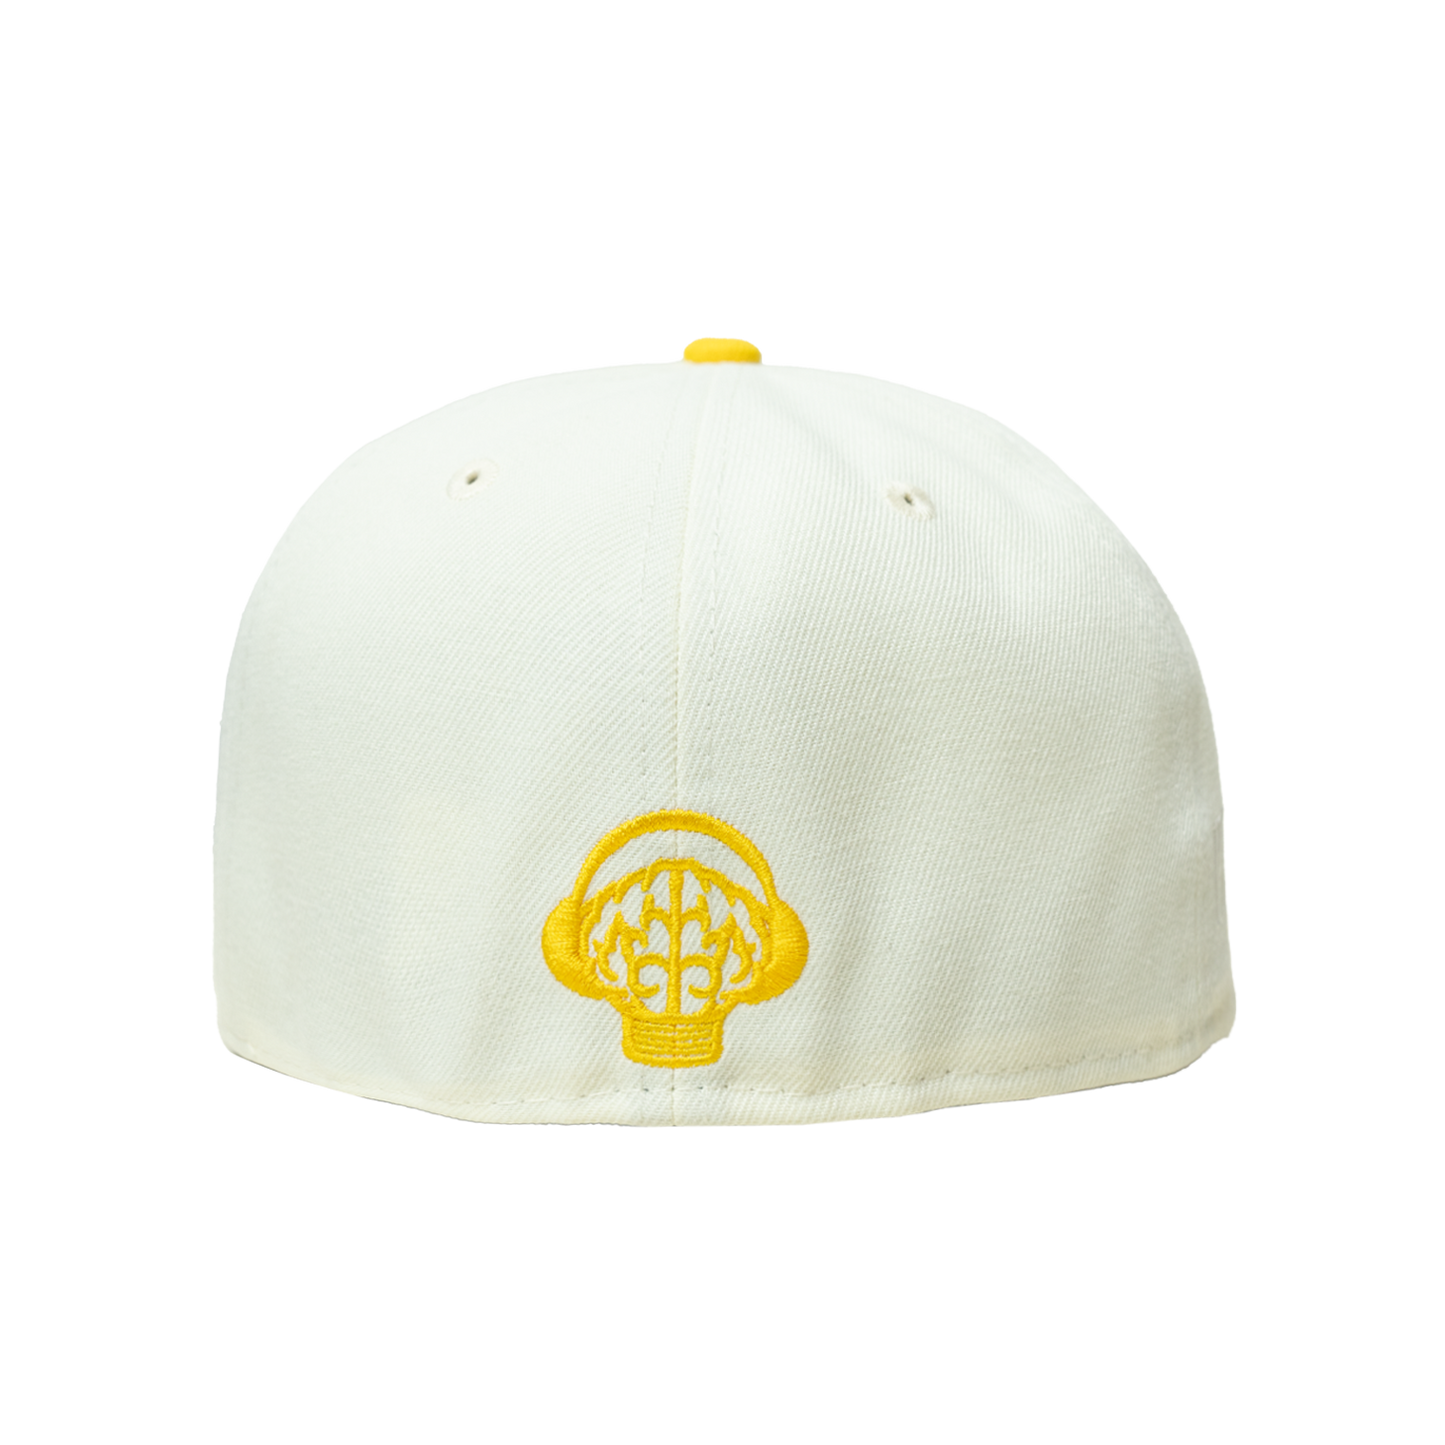 N•E•R•D x PLEASURES  NEW ERA FITTED HAT - CREAM/YELLOW